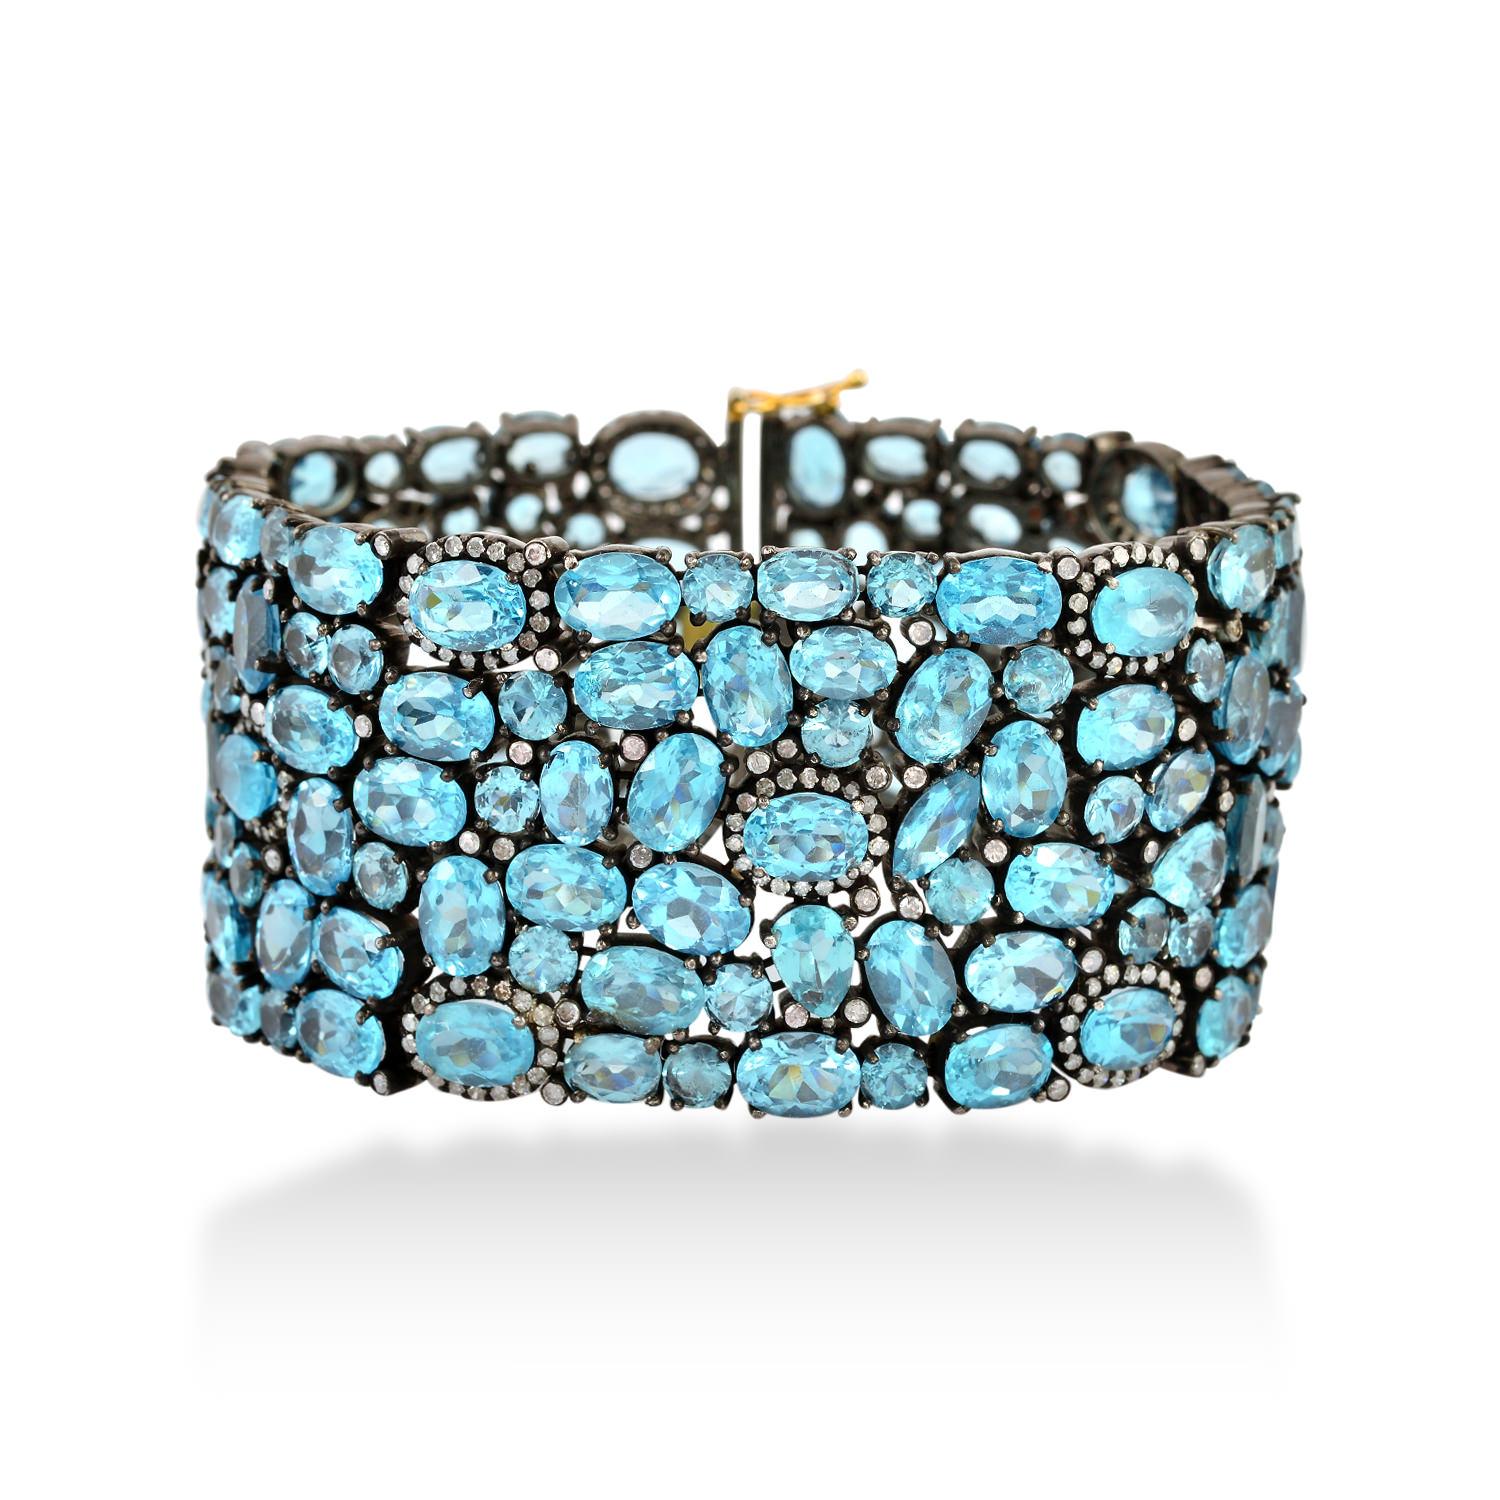 Cool and stunning looking this Apatite and Diamond Flex Bracelet in Gold and silver is 7 inch long with tongue clasp and safety locks on the side. 



14k:5.40gms
Diamond: 3.25cts
Sl:52.37gms
Apetite:101.12 cts